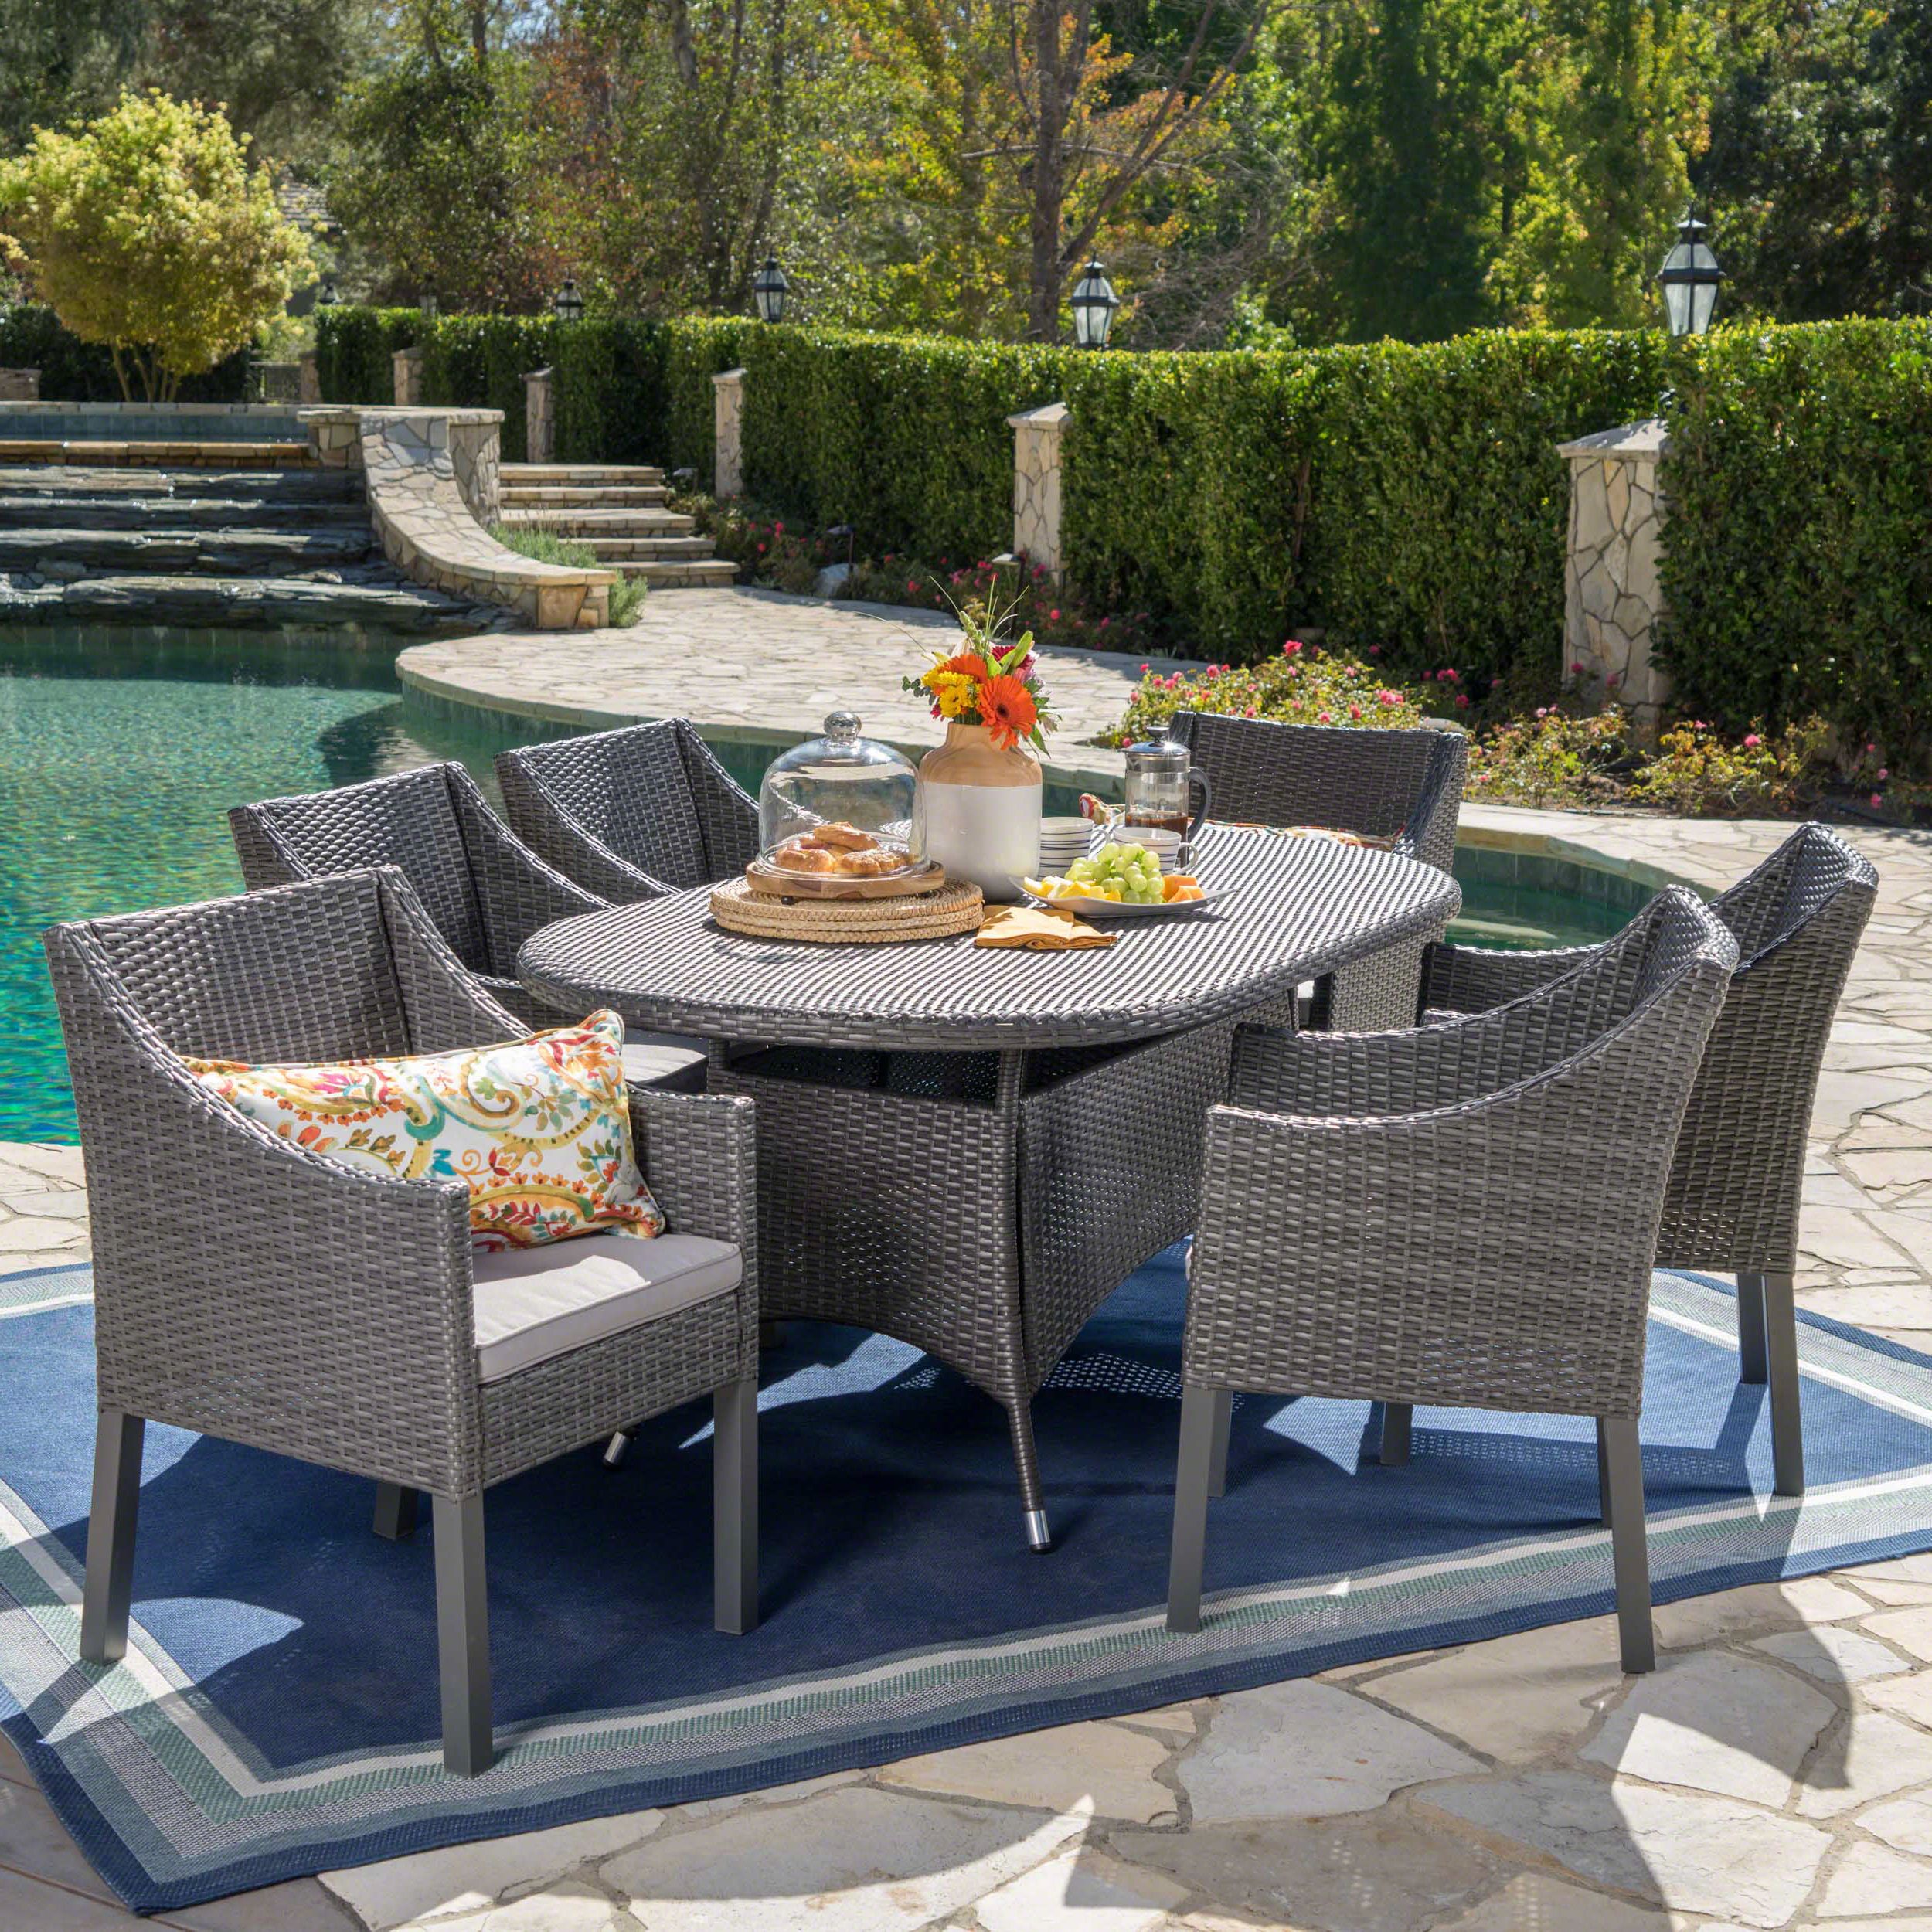 Leo Outdoor 7 Piece Wicker Oval Dining Set With Cushions, Grey, Silver Pertaining To Recent Gray Wicker Rectangular Patio Dining Sets (View 1 of 15)